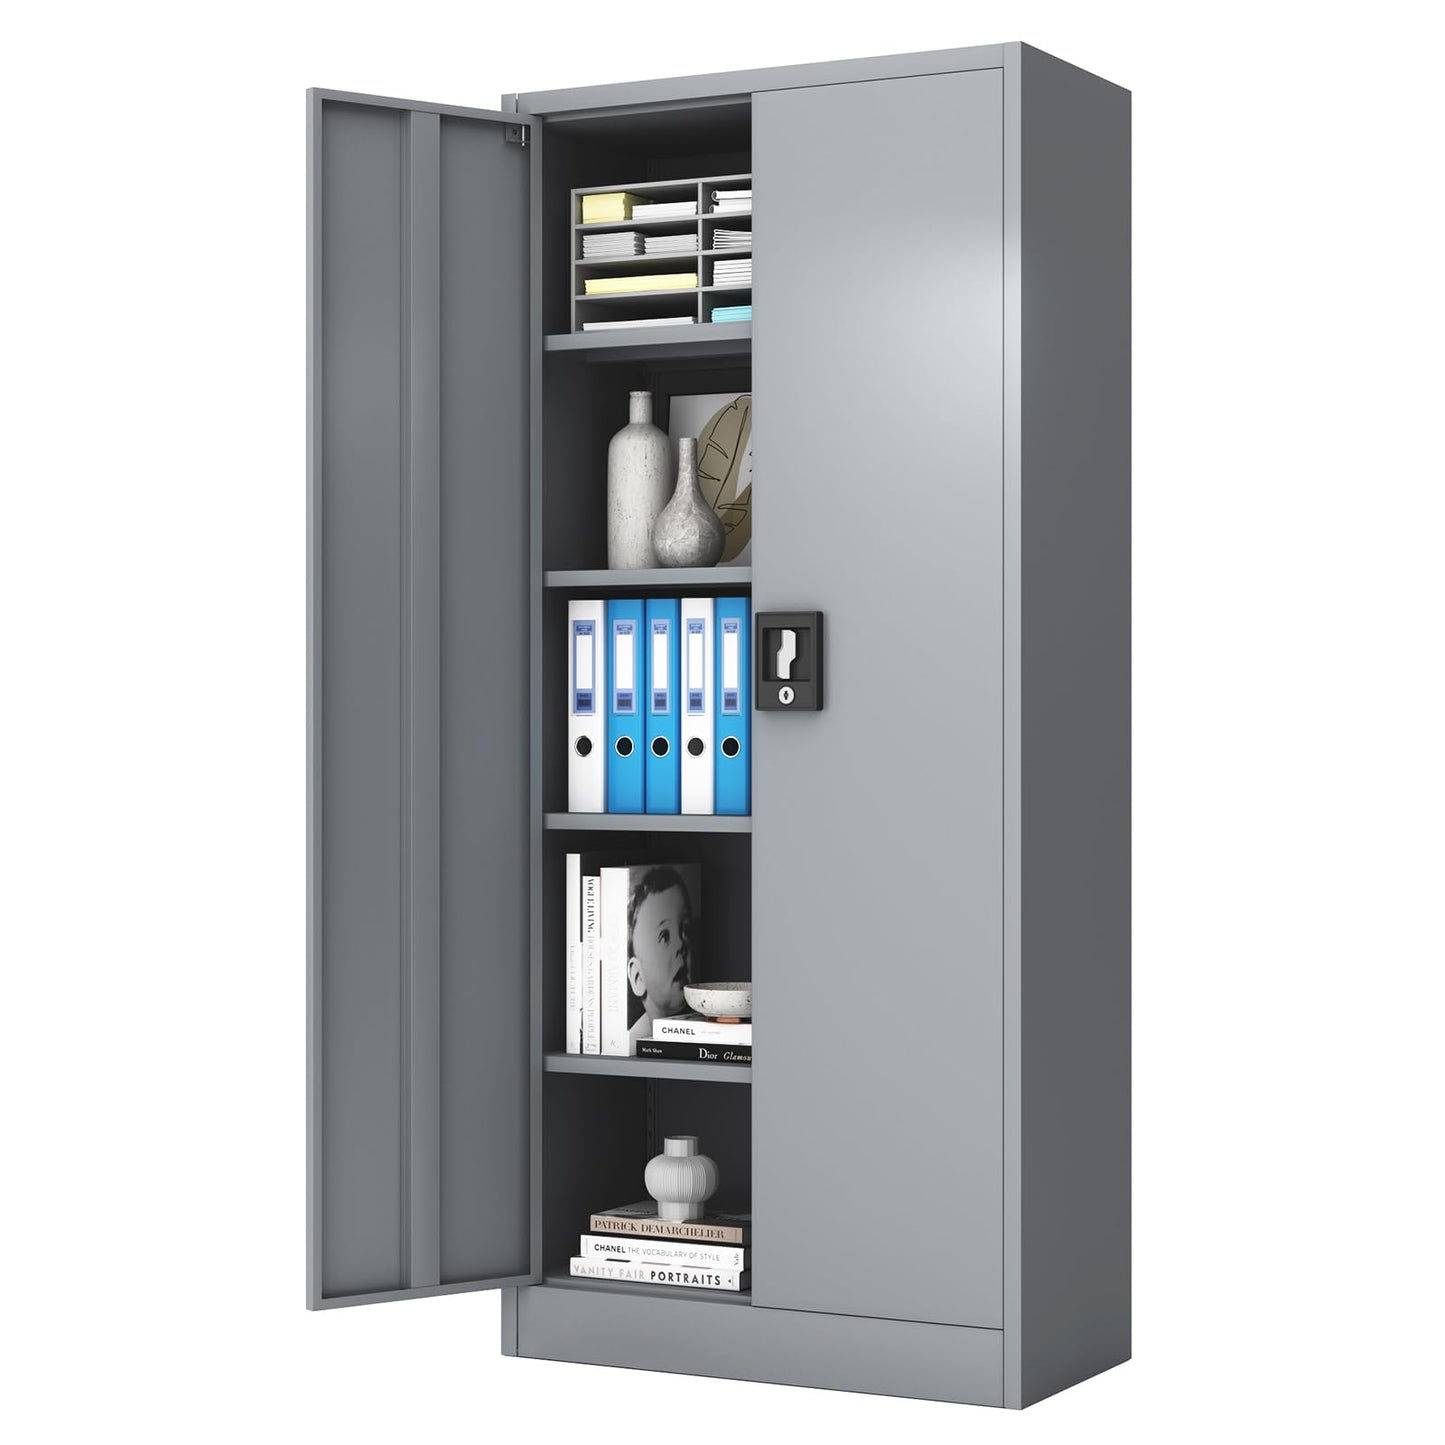 LUCYPAL Metal Storage Cabinet with 4 Shelves,Steel Office Storage Cabinet with Locking Doors,70.5”H Metal Cabinet for Home Office,Garage,Grey